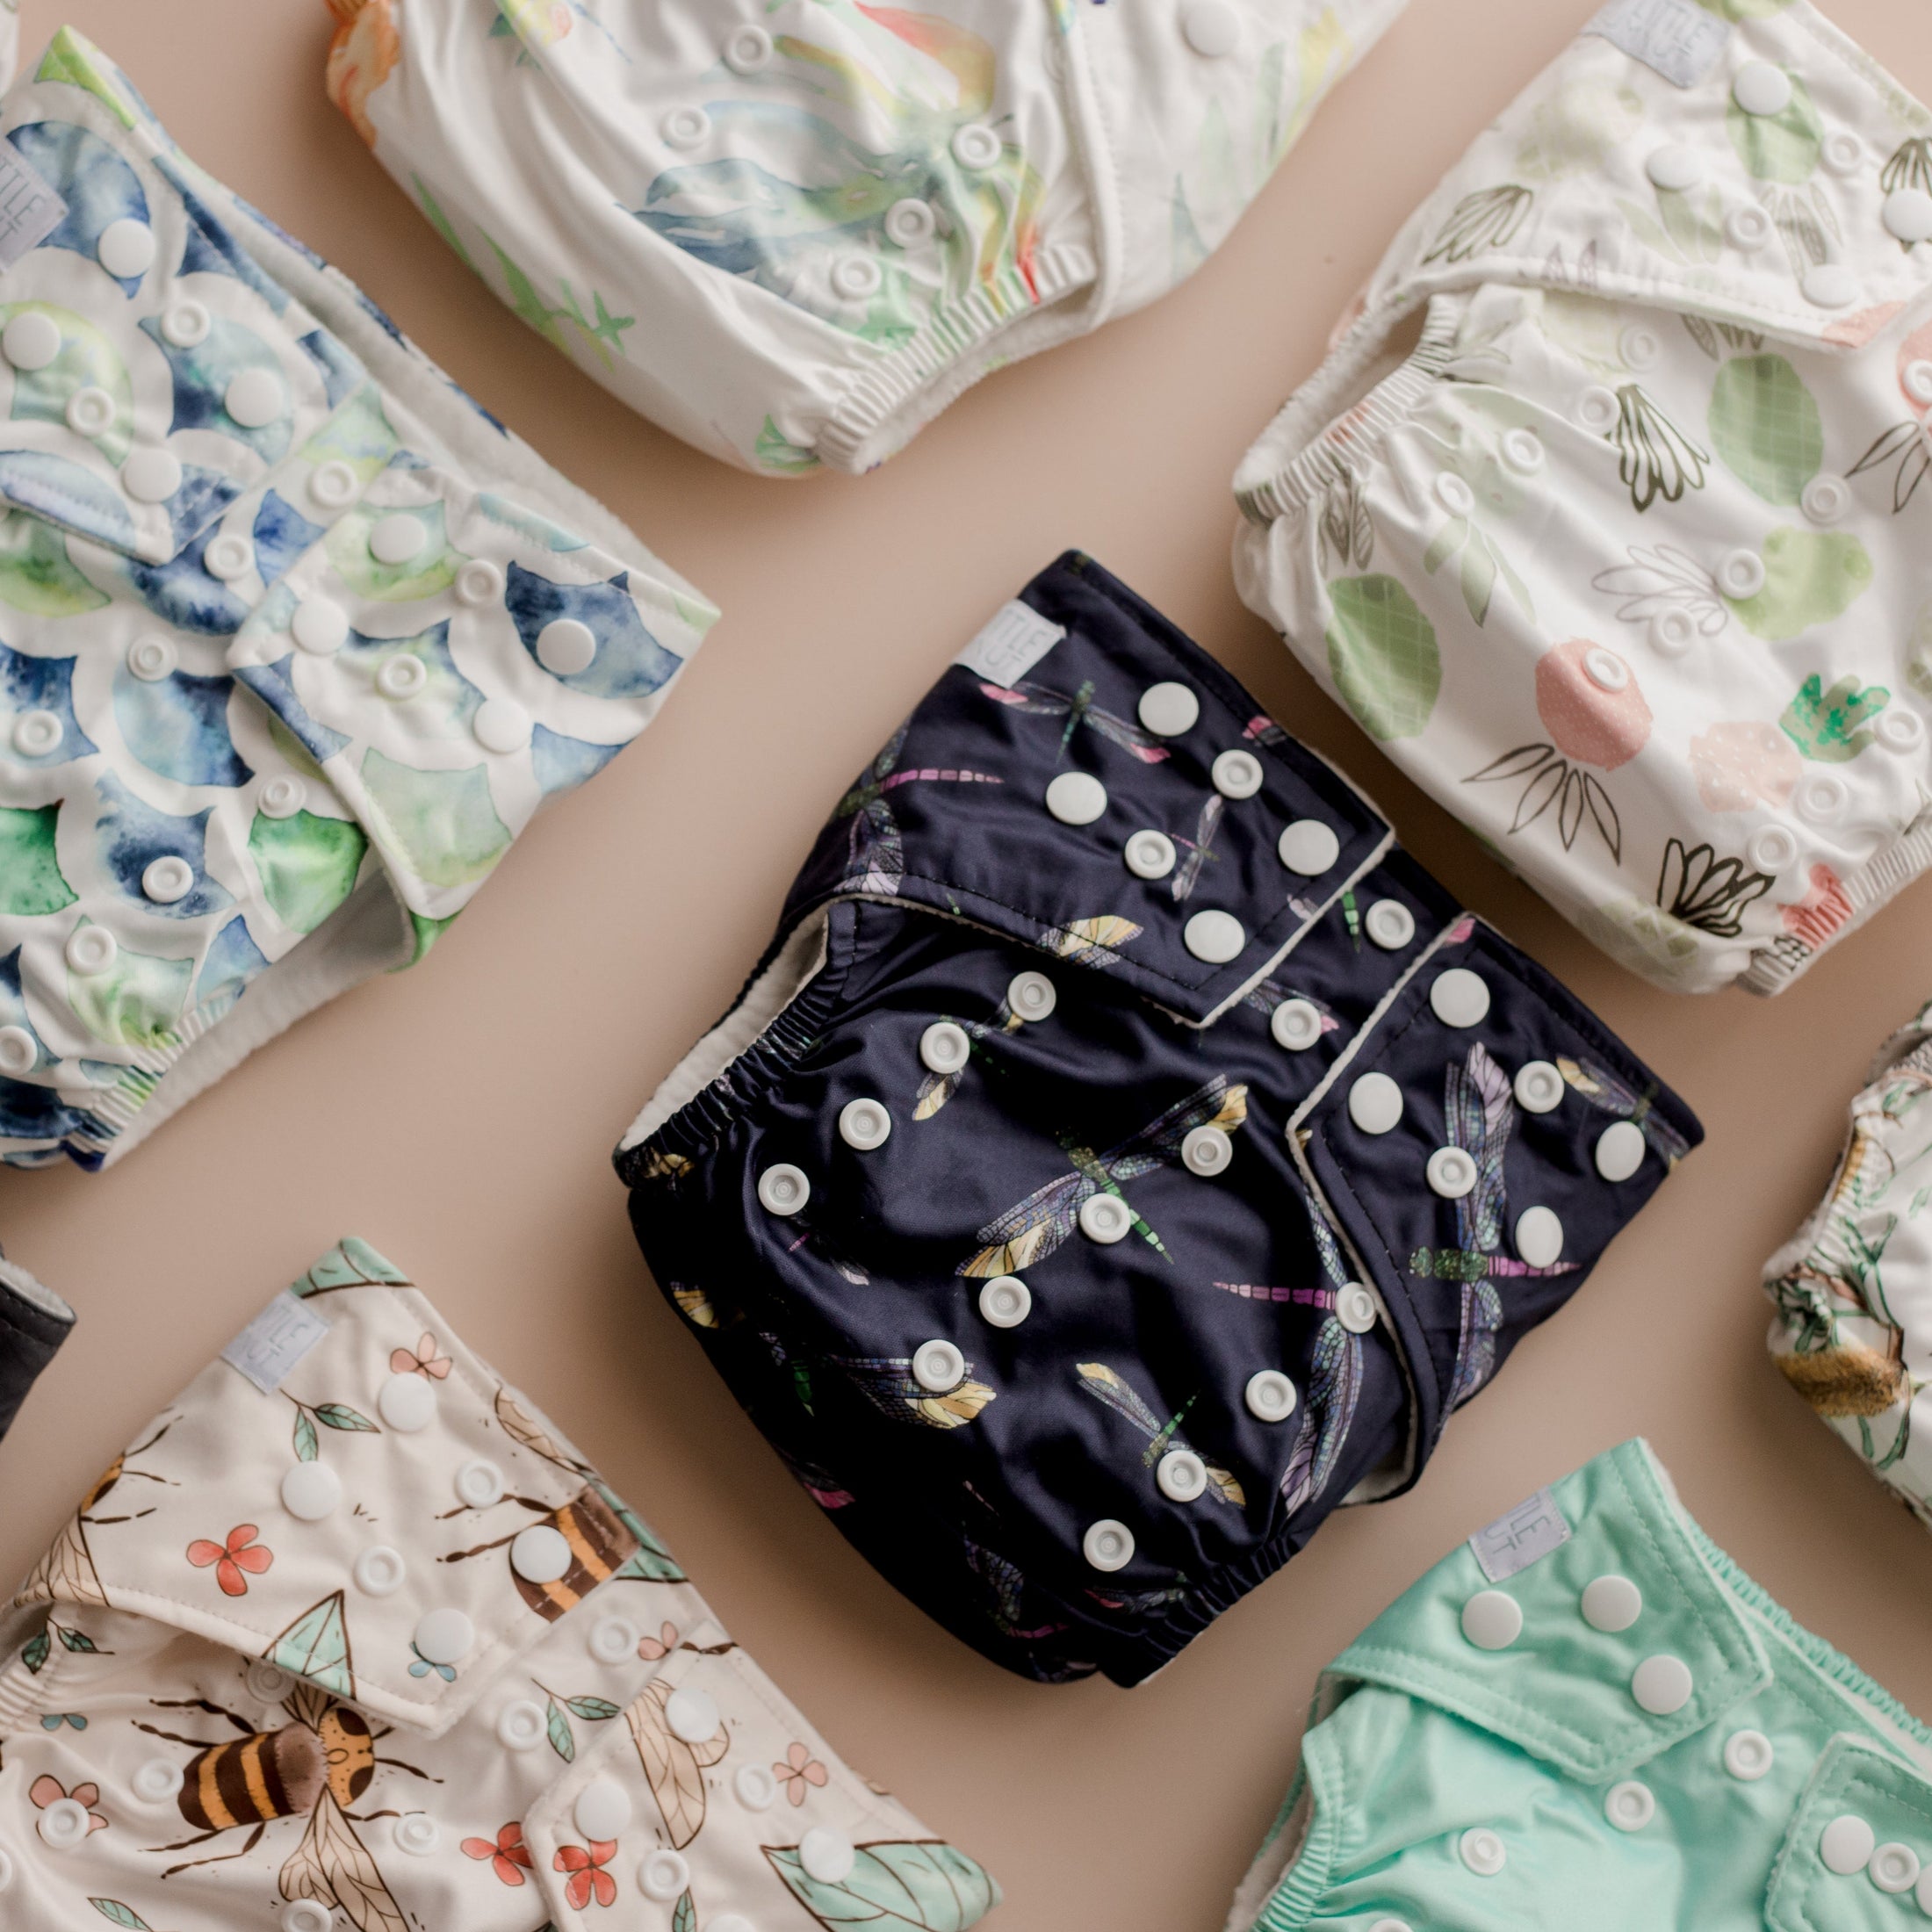 Cloth Nappy 2.0 Full-Time Bundle (25 Nappies)